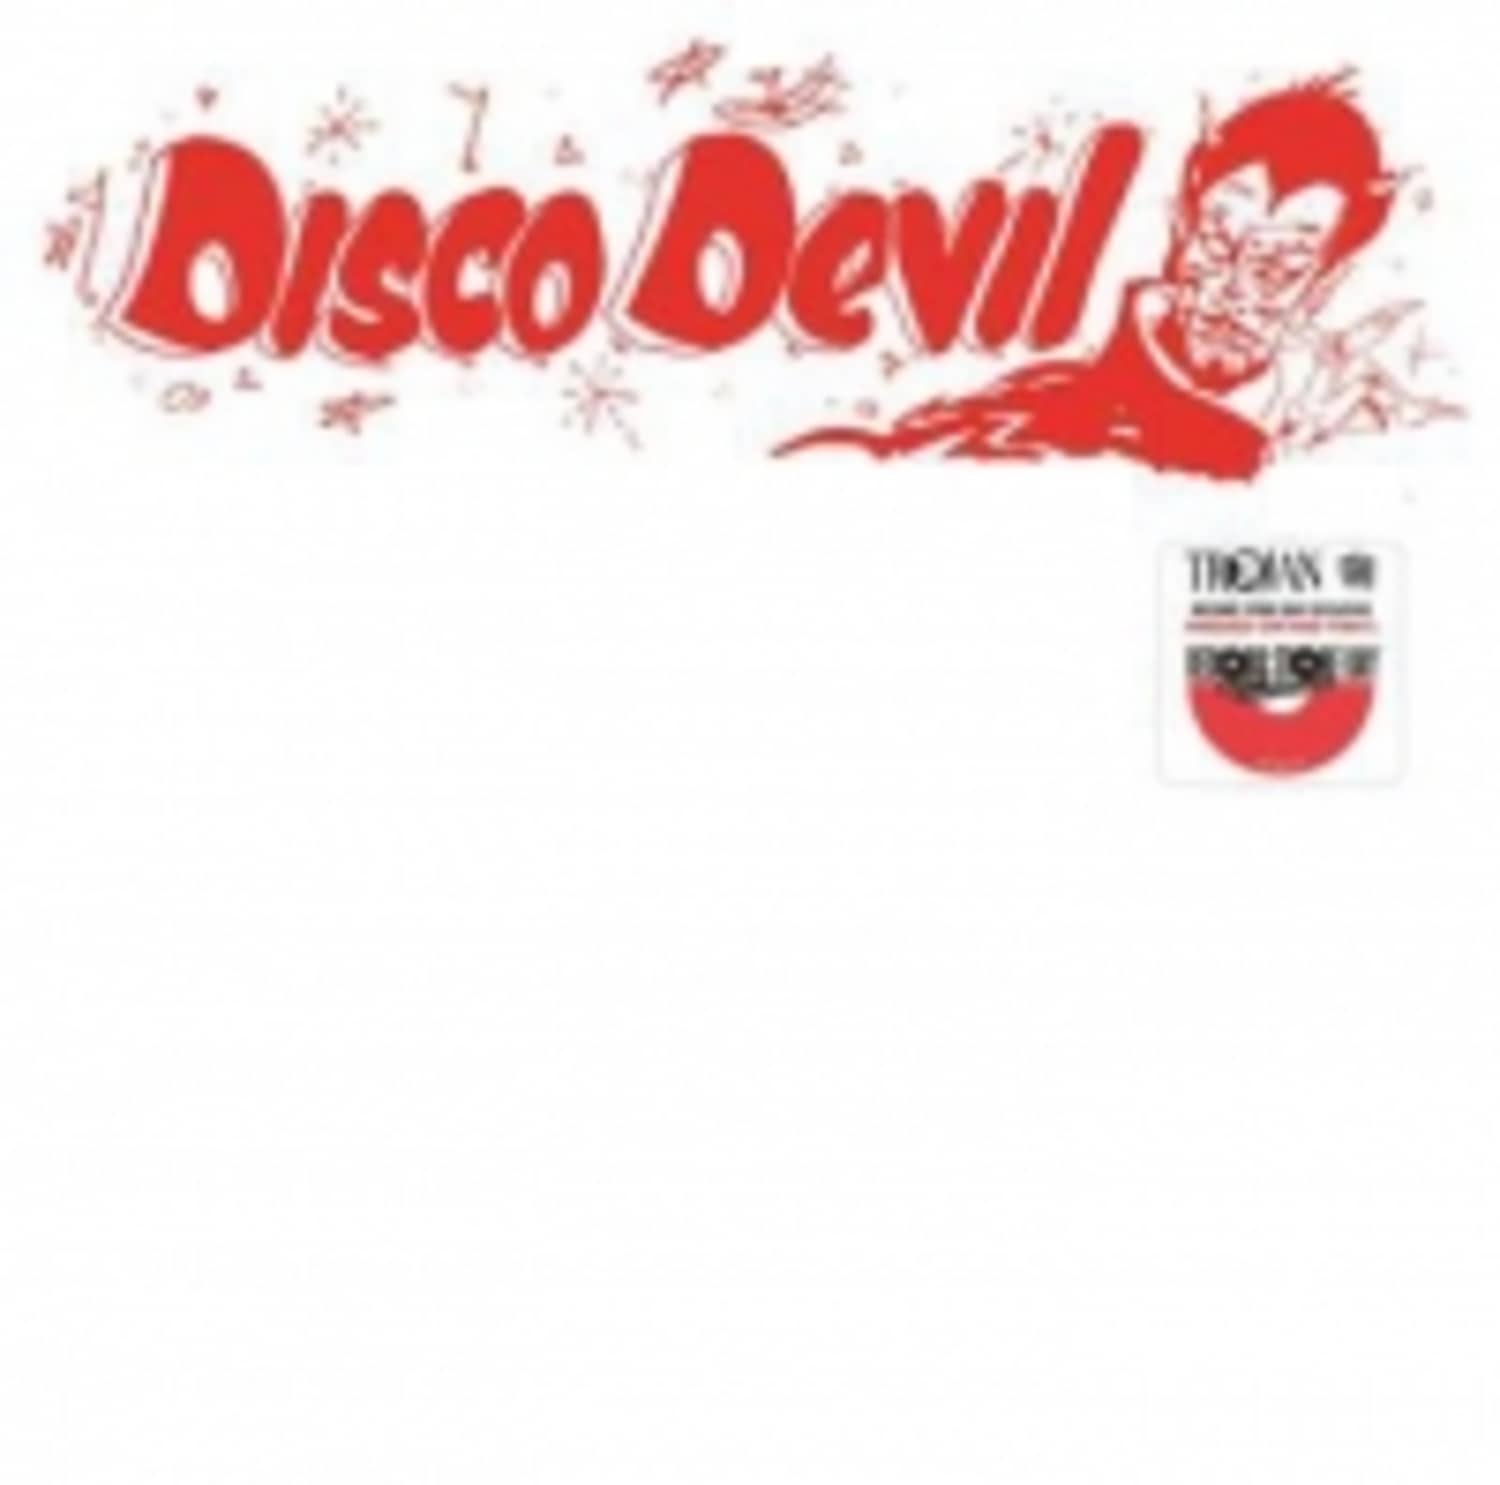 Lee Perry & The Full Experience - DISCO DEVIL